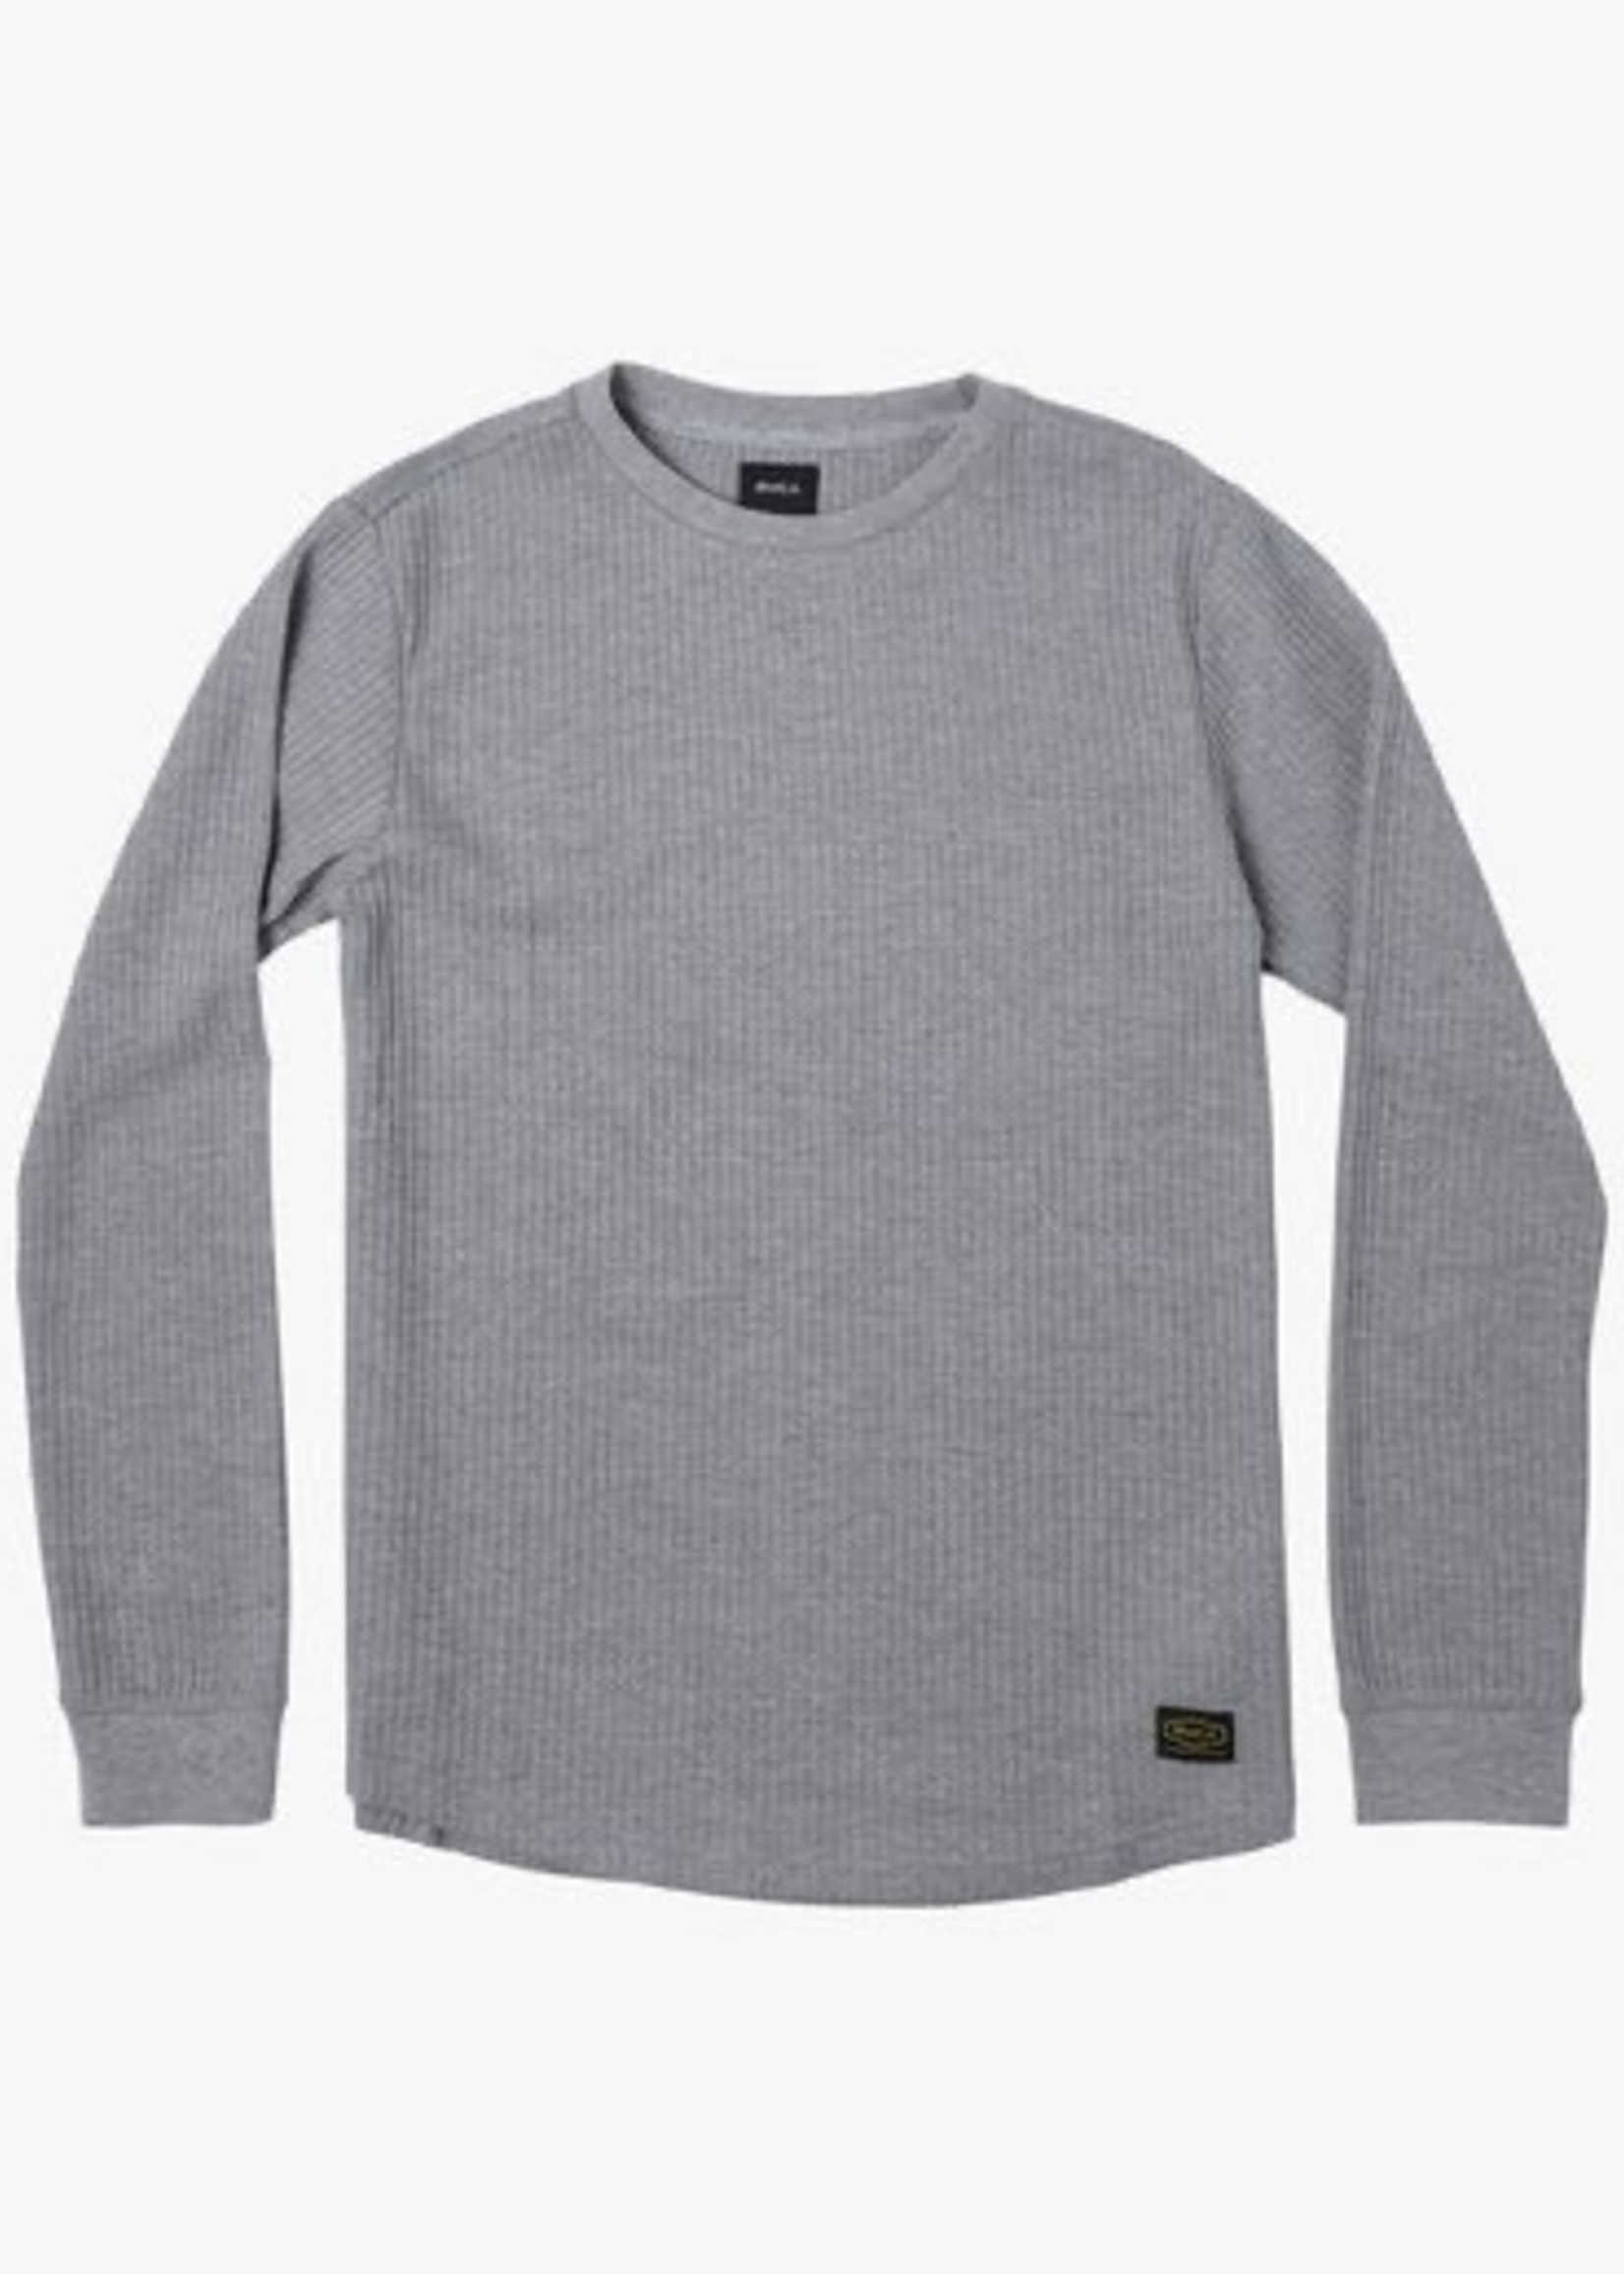 RVCA DAY SHIFT THERMAL LS